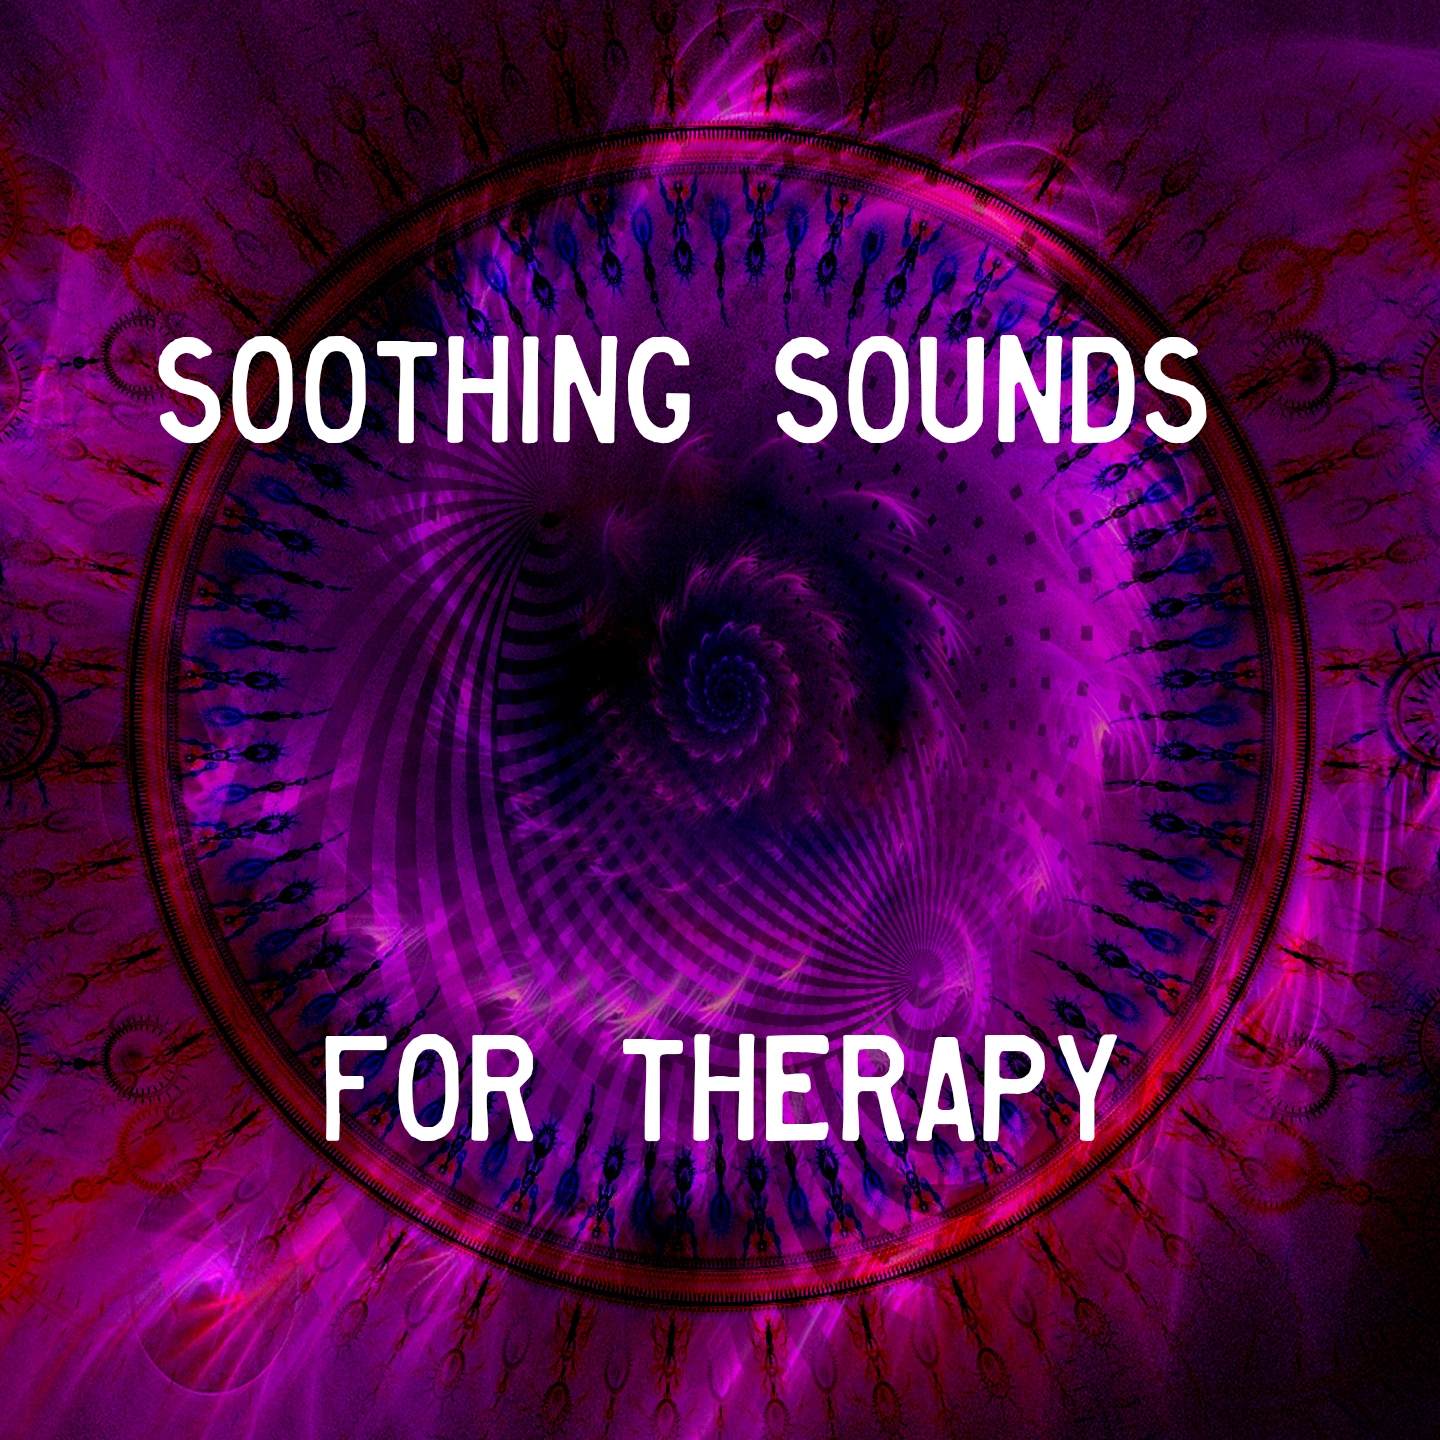 Soothing Sounds For Therapy